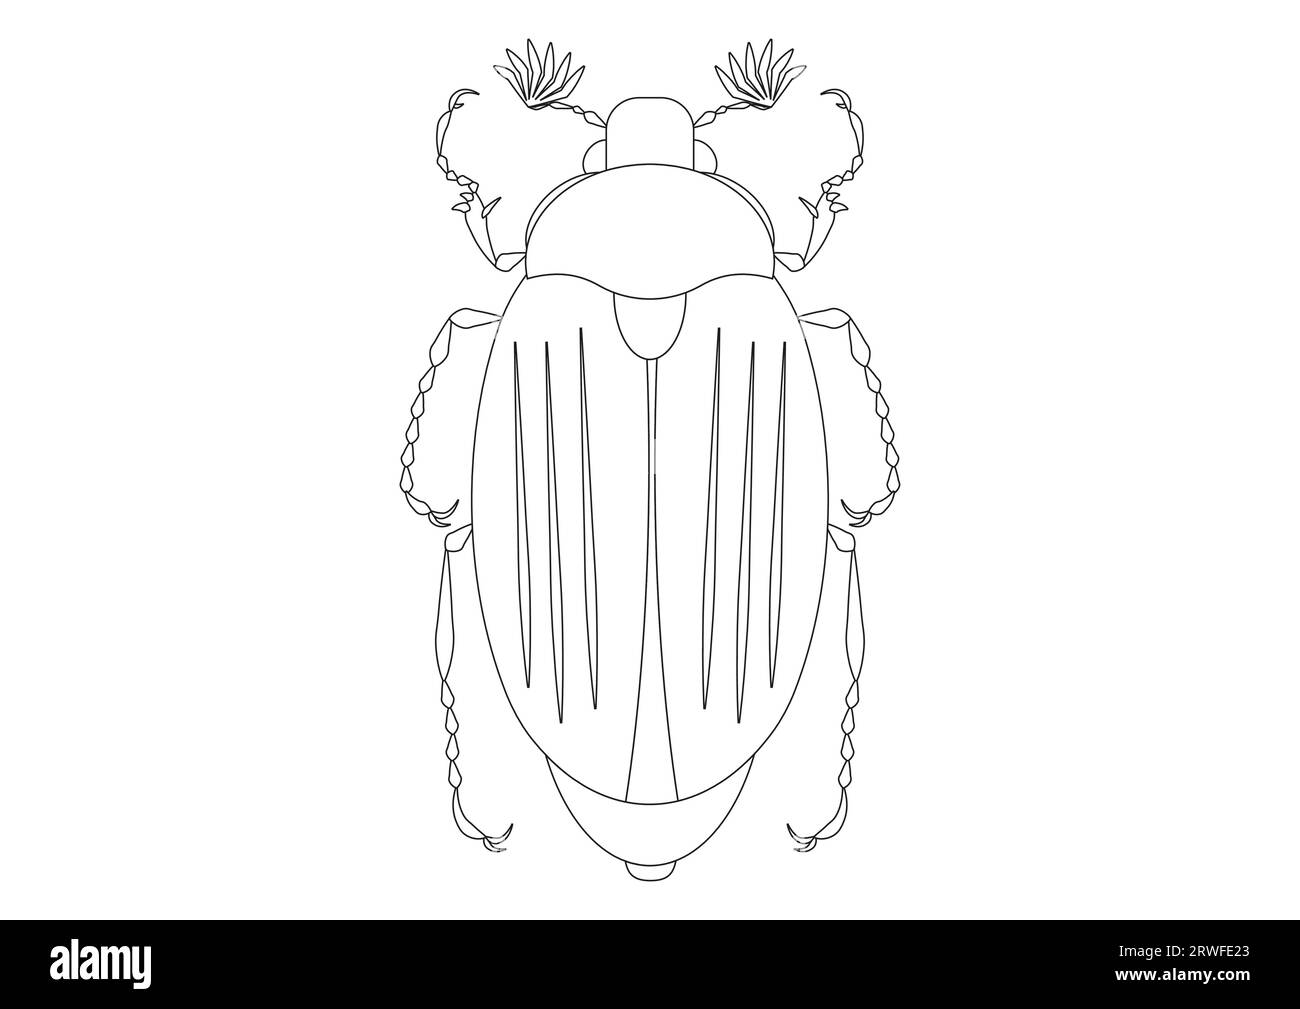 Black and White May Beetle Clipart Vector isolated on White Background. Coloring Page of a May Beetle Stock Vector